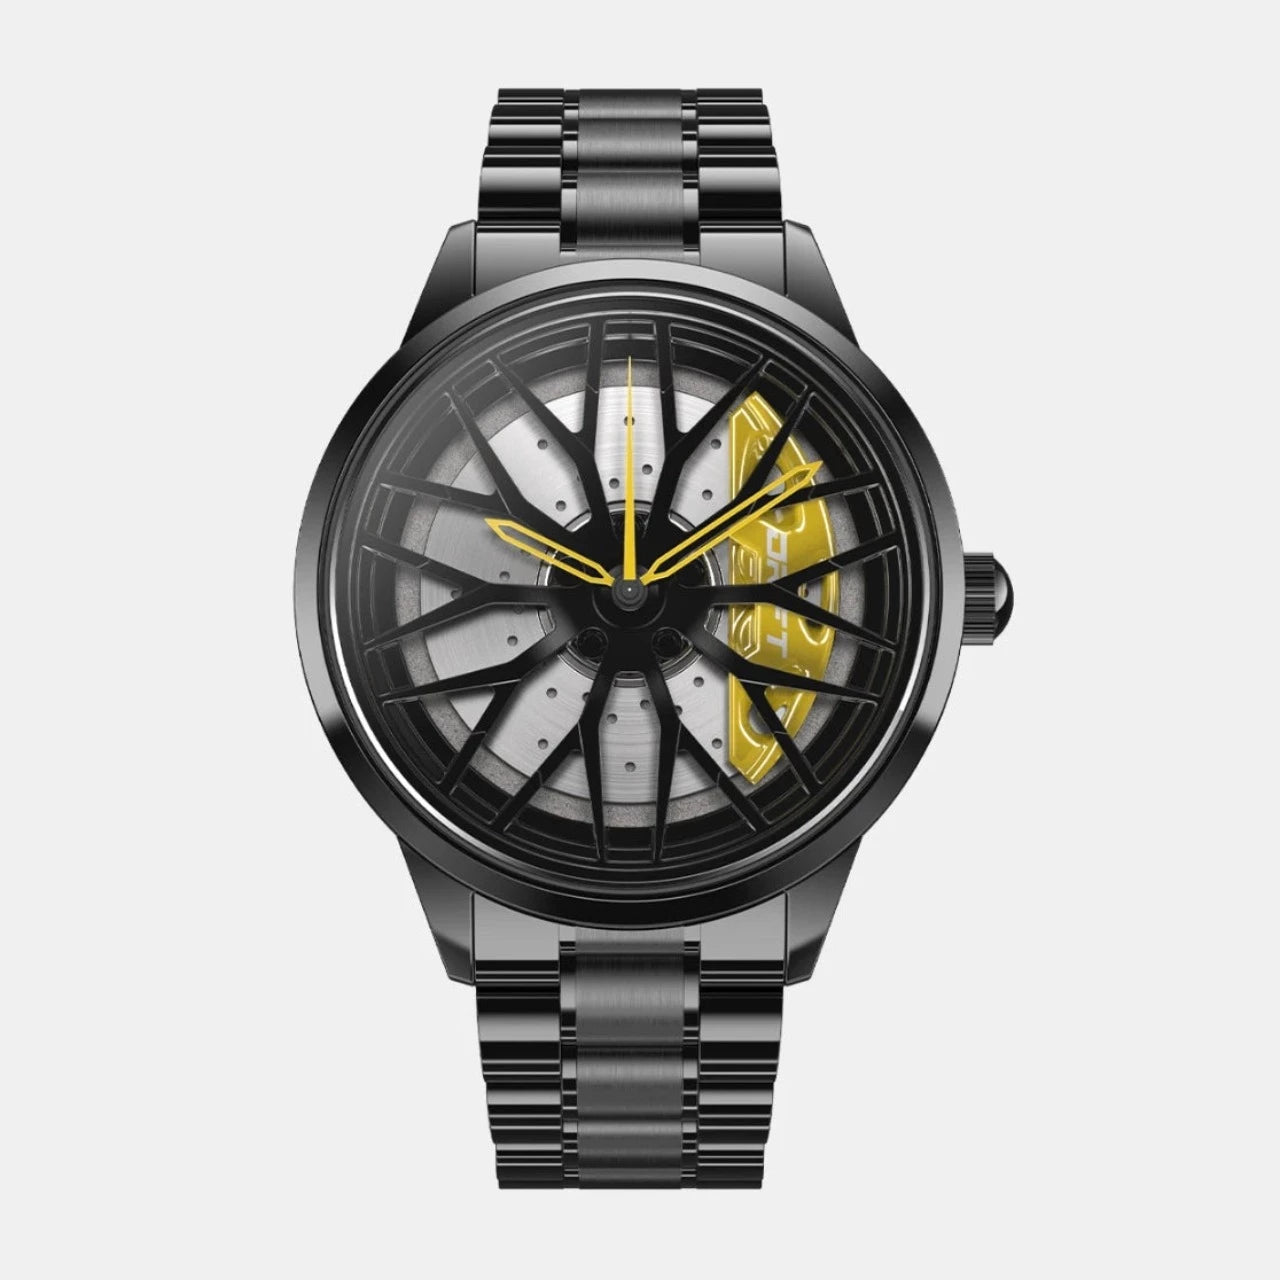 Illuminate your style with our innovative yellow Motorsport Rim Watch! Precision-crafted by a German startup, these watches are designed to captivate motorsport, tuning, and auto enthusiasts. Ignite your passion! #id_46744363073866